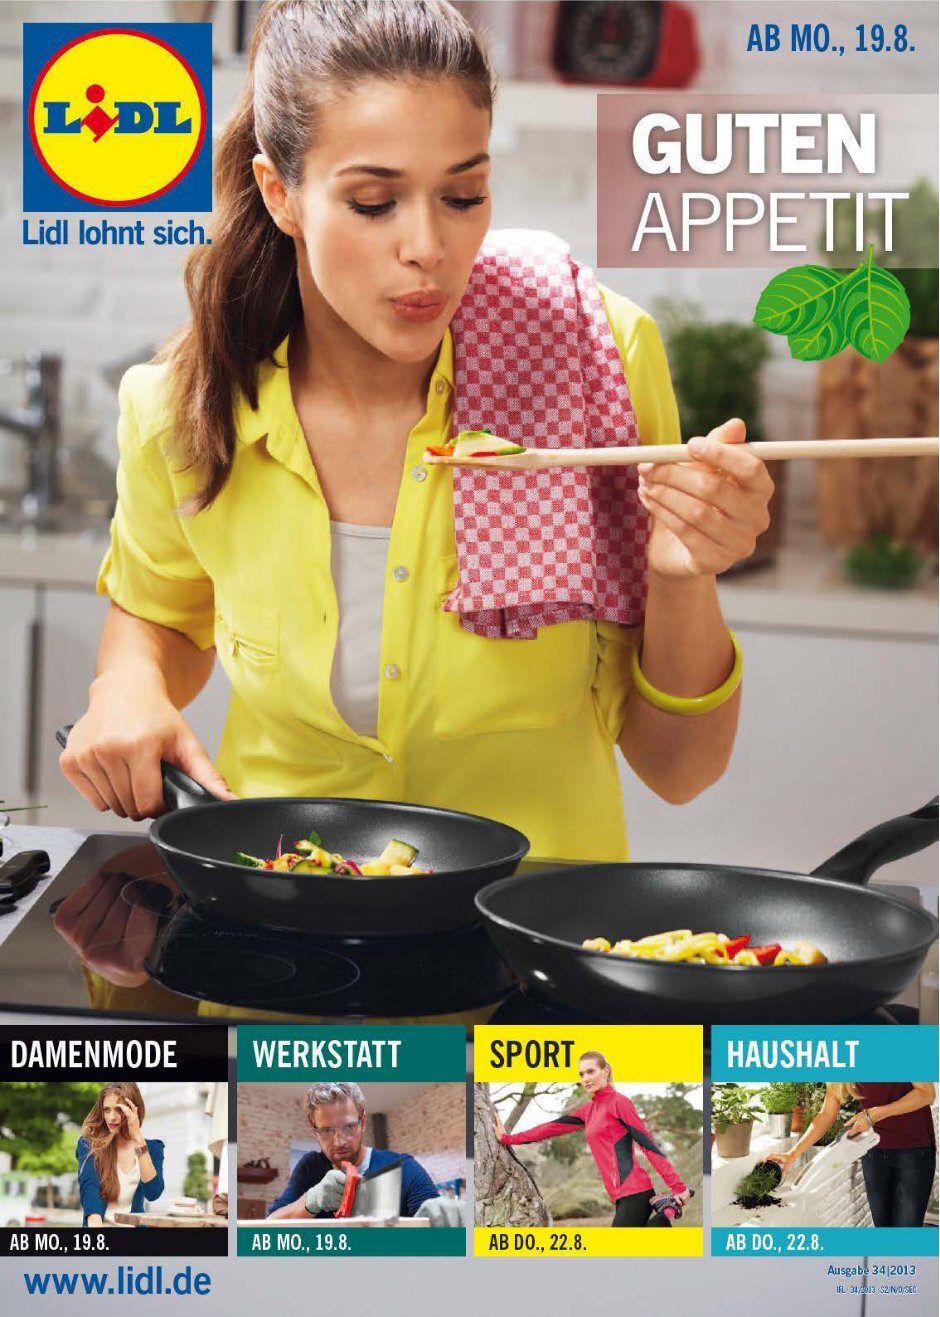 10 free Magazines from LIDL.DE